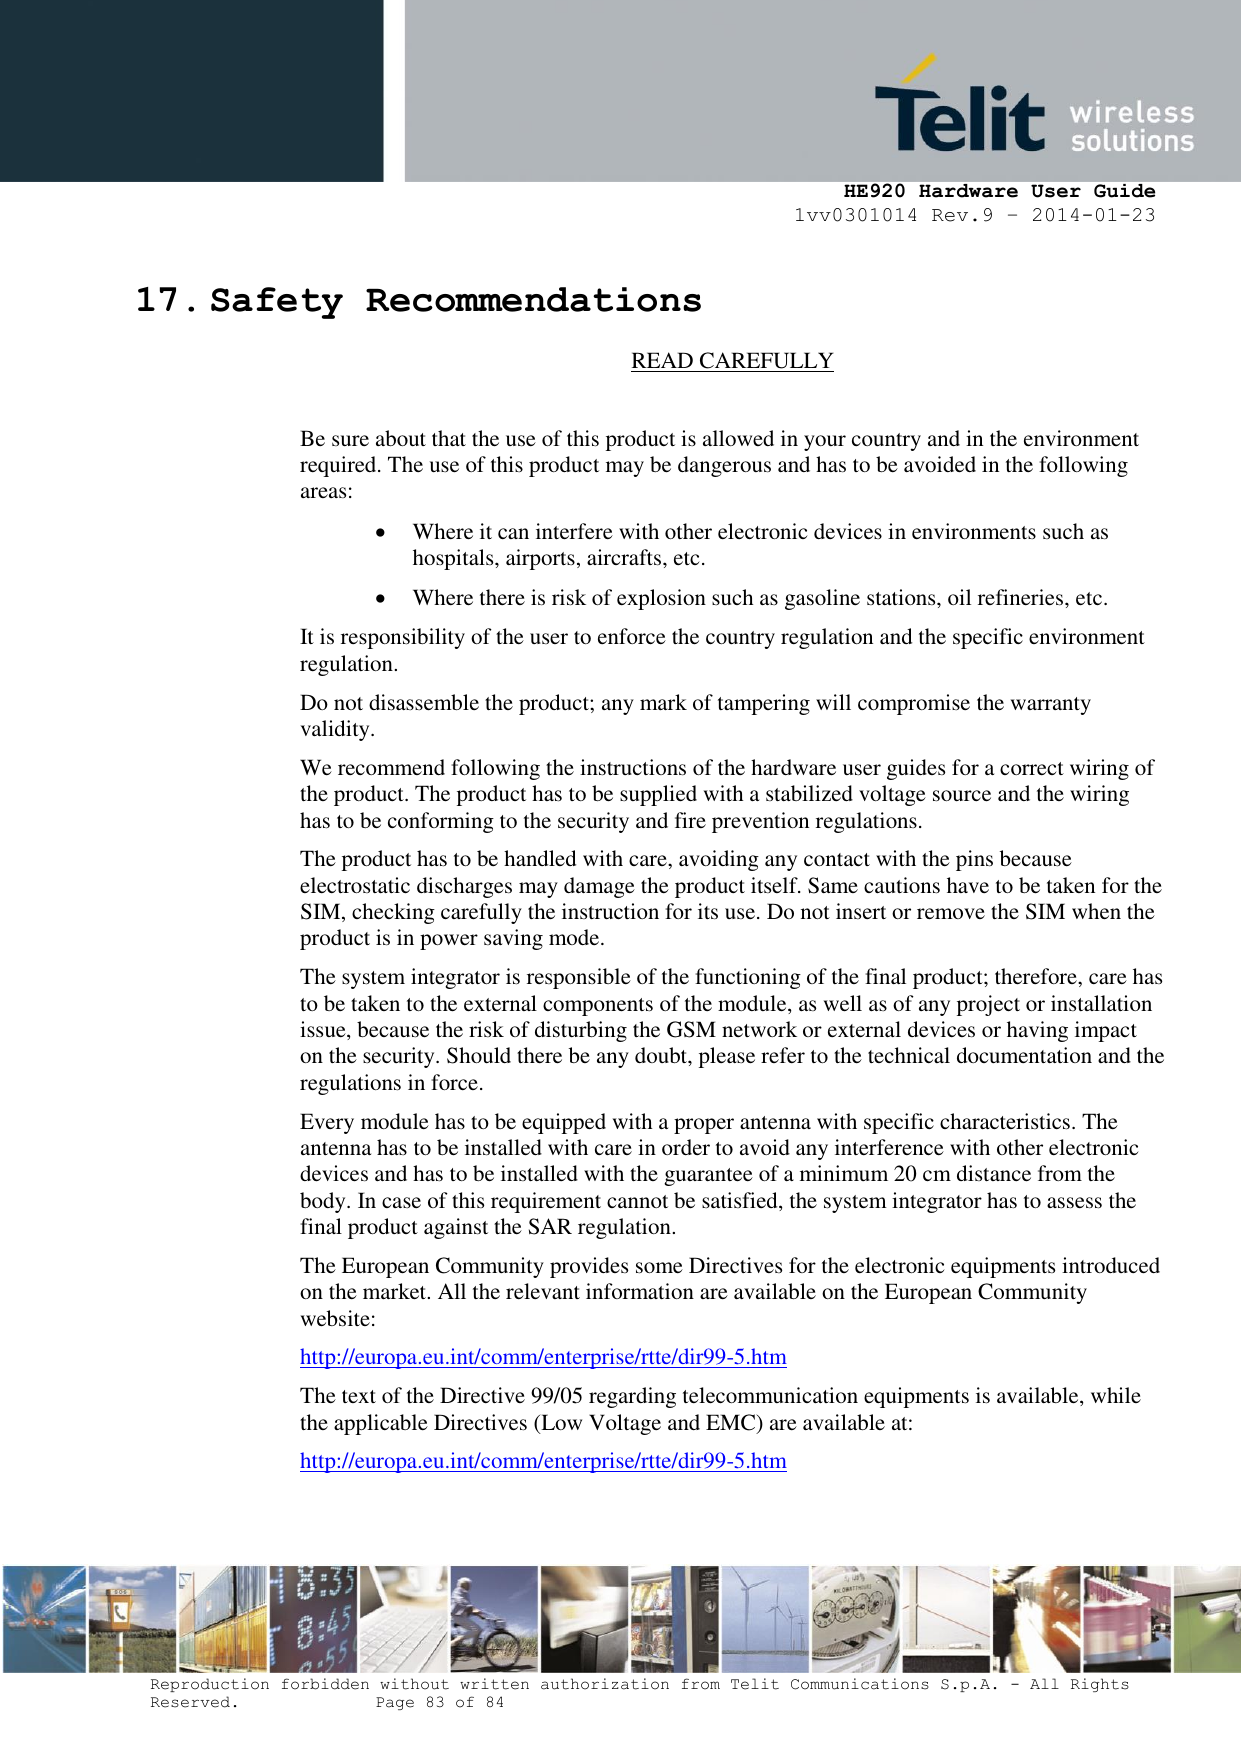     HE920 Hardware User Guide 1vv0301014 Rev.9 – 2014-01-23 Reproduction forbidden without written authorization from Telit Communications S.p.A. - All Rights Reserved.    Page 83 of 84  17. Safety Recommendations READ CAREFULLY  Be sure about that the use of this product is allowed in your country and in the environment required. The use of this product may be dangerous and has to be avoided in the following areas:  Where it can interfere with other electronic devices in environments such as hospitals, airports, aircrafts, etc.  Where there is risk of explosion such as gasoline stations, oil refineries, etc.  It is responsibility of the user to enforce the country regulation and the specific environment regulation. Do not disassemble the product; any mark of tampering will compromise the warranty validity. We recommend following the instructions of the hardware user guides for a correct wiring of the product. The product has to be supplied with a stabilized voltage source and the wiring has to be conforming to the security and fire prevention regulations. The product has to be handled with care, avoiding any contact with the pins because electrostatic discharges may damage the product itself. Same cautions have to be taken for the SIM, checking carefully the instruction for its use. Do not insert or remove the SIM when the product is in power saving mode. The system integrator is responsible of the functioning of the final product; therefore, care has to be taken to the external components of the module, as well as of any project or installation issue, because the risk of disturbing the GSM network or external devices or having impact on the security. Should there be any doubt, please refer to the technical documentation and the regulations in force. Every module has to be equipped with a proper antenna with specific characteristics. The antenna has to be installed with care in order to avoid any interference with other electronic devices and has to be installed with the guarantee of a minimum 20 cm distance from the body. In case of this requirement cannot be satisfied, the system integrator has to assess the final product against the SAR regulation. The European Community provides some Directives for the electronic equipments introduced on the market. All the relevant information are available on the European Community website: http://europa.eu.int/comm/enterprise/rtte/dir99-5.htm The text of the Directive 99/05 regarding telecommunication equipments is available, while the applicable Directives (Low Voltage and EMC) are available at: http://europa.eu.int/comm/enterprise/rtte/dir99-5.htm  